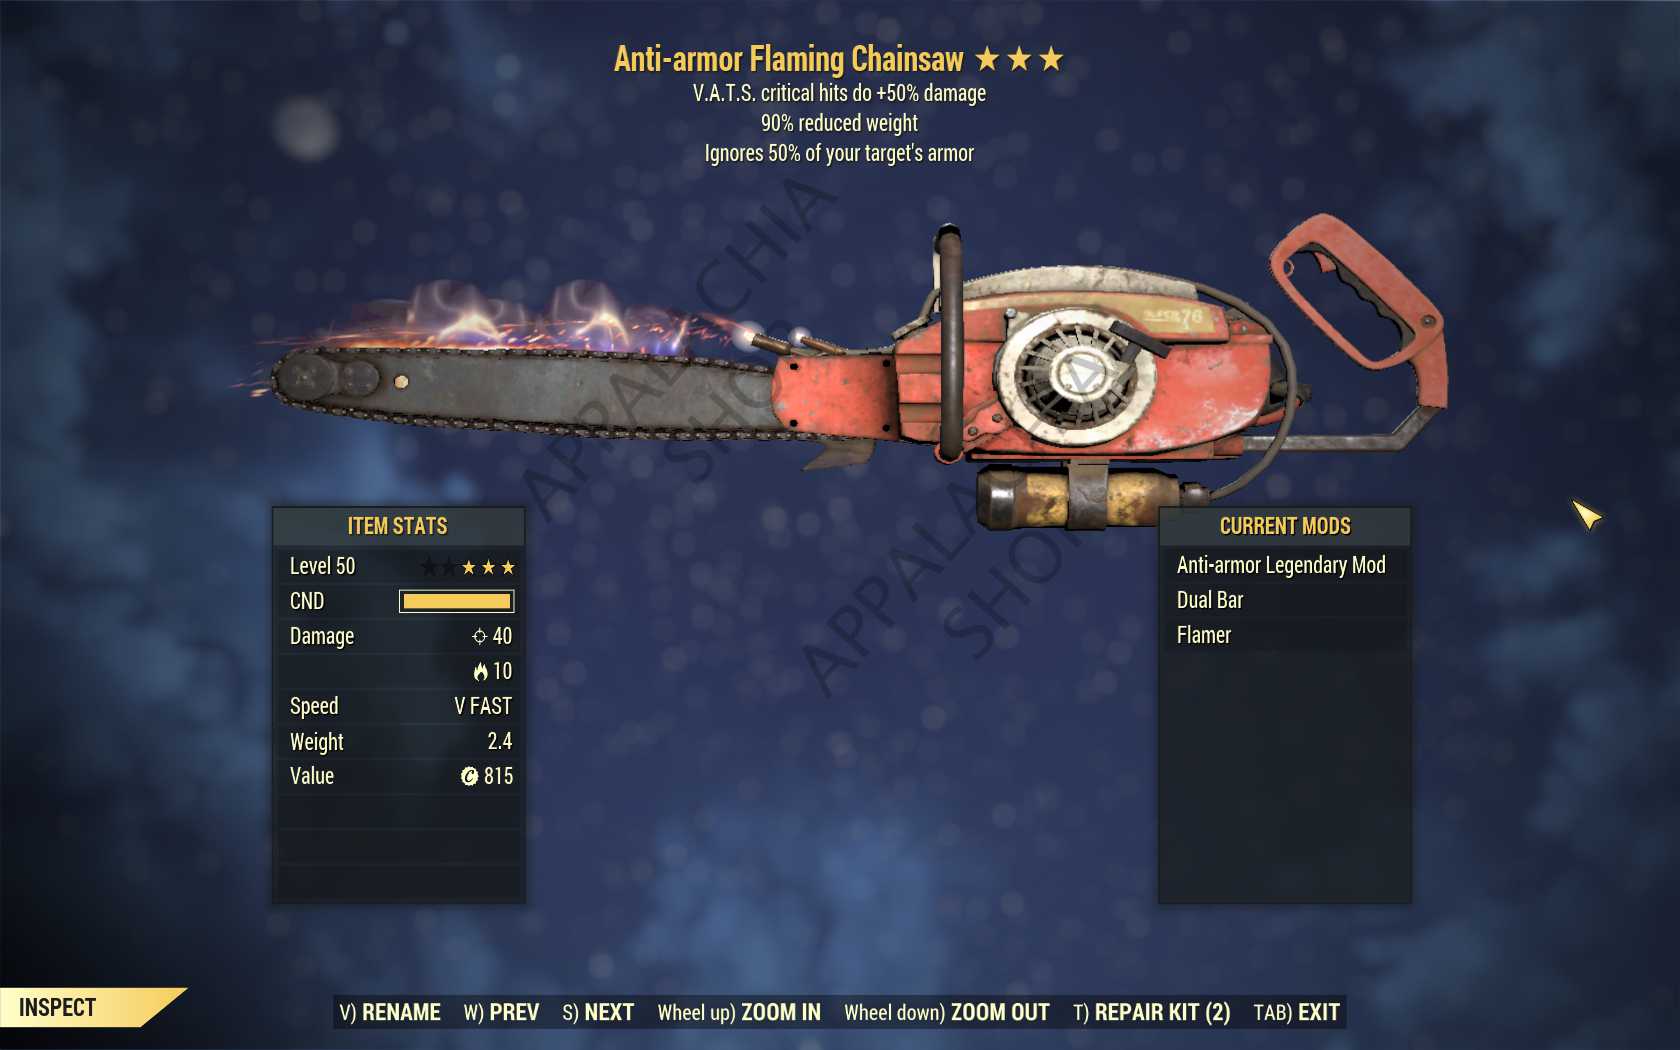 Anti-Armor Chainsaw (+50% critical damage, 90% reduced weight)